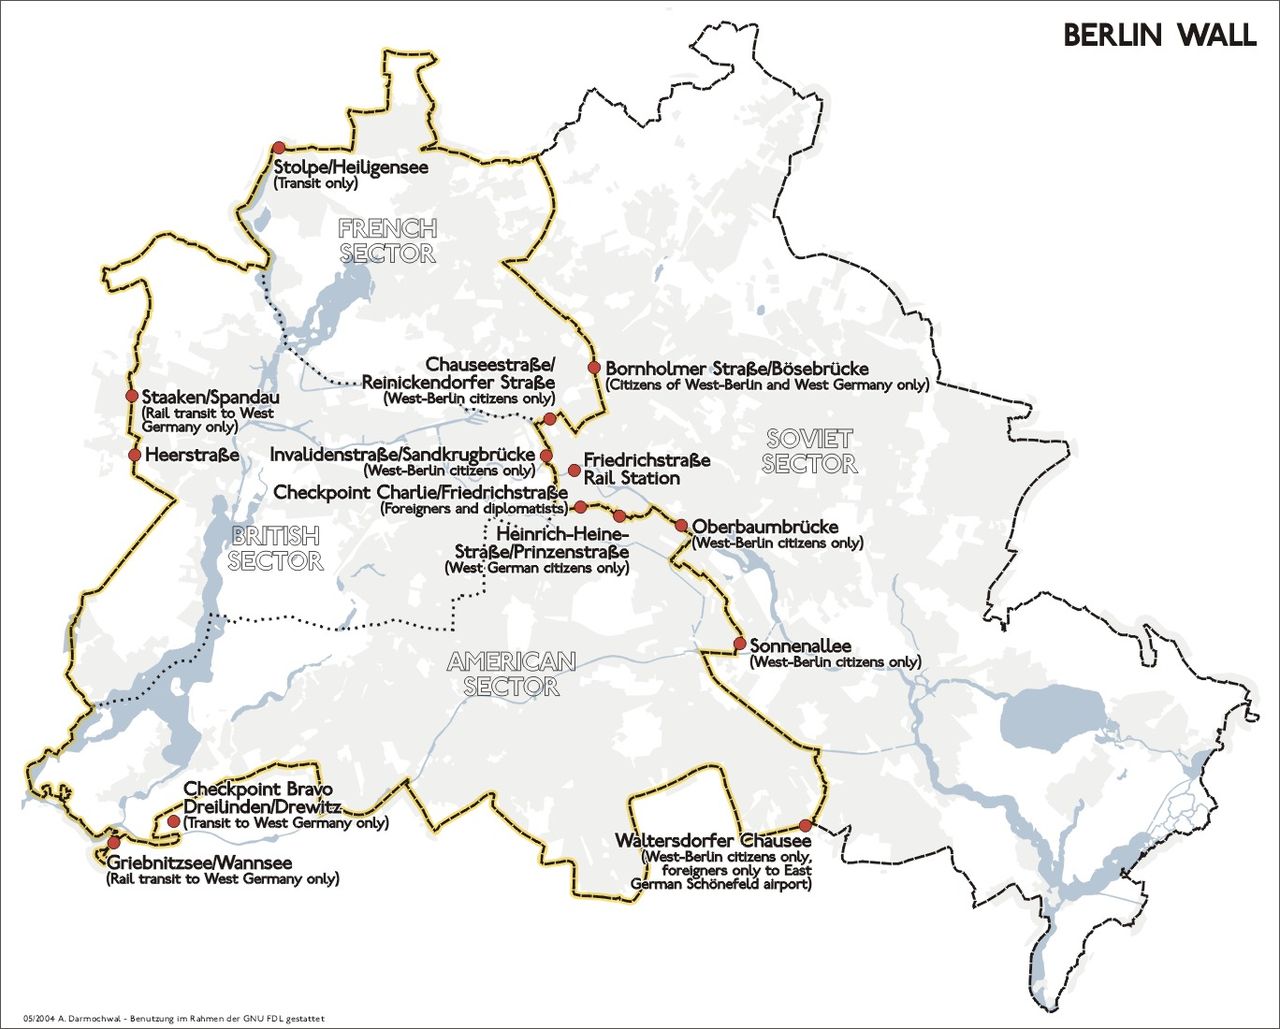 Berlin Wall’s border control checkpoints